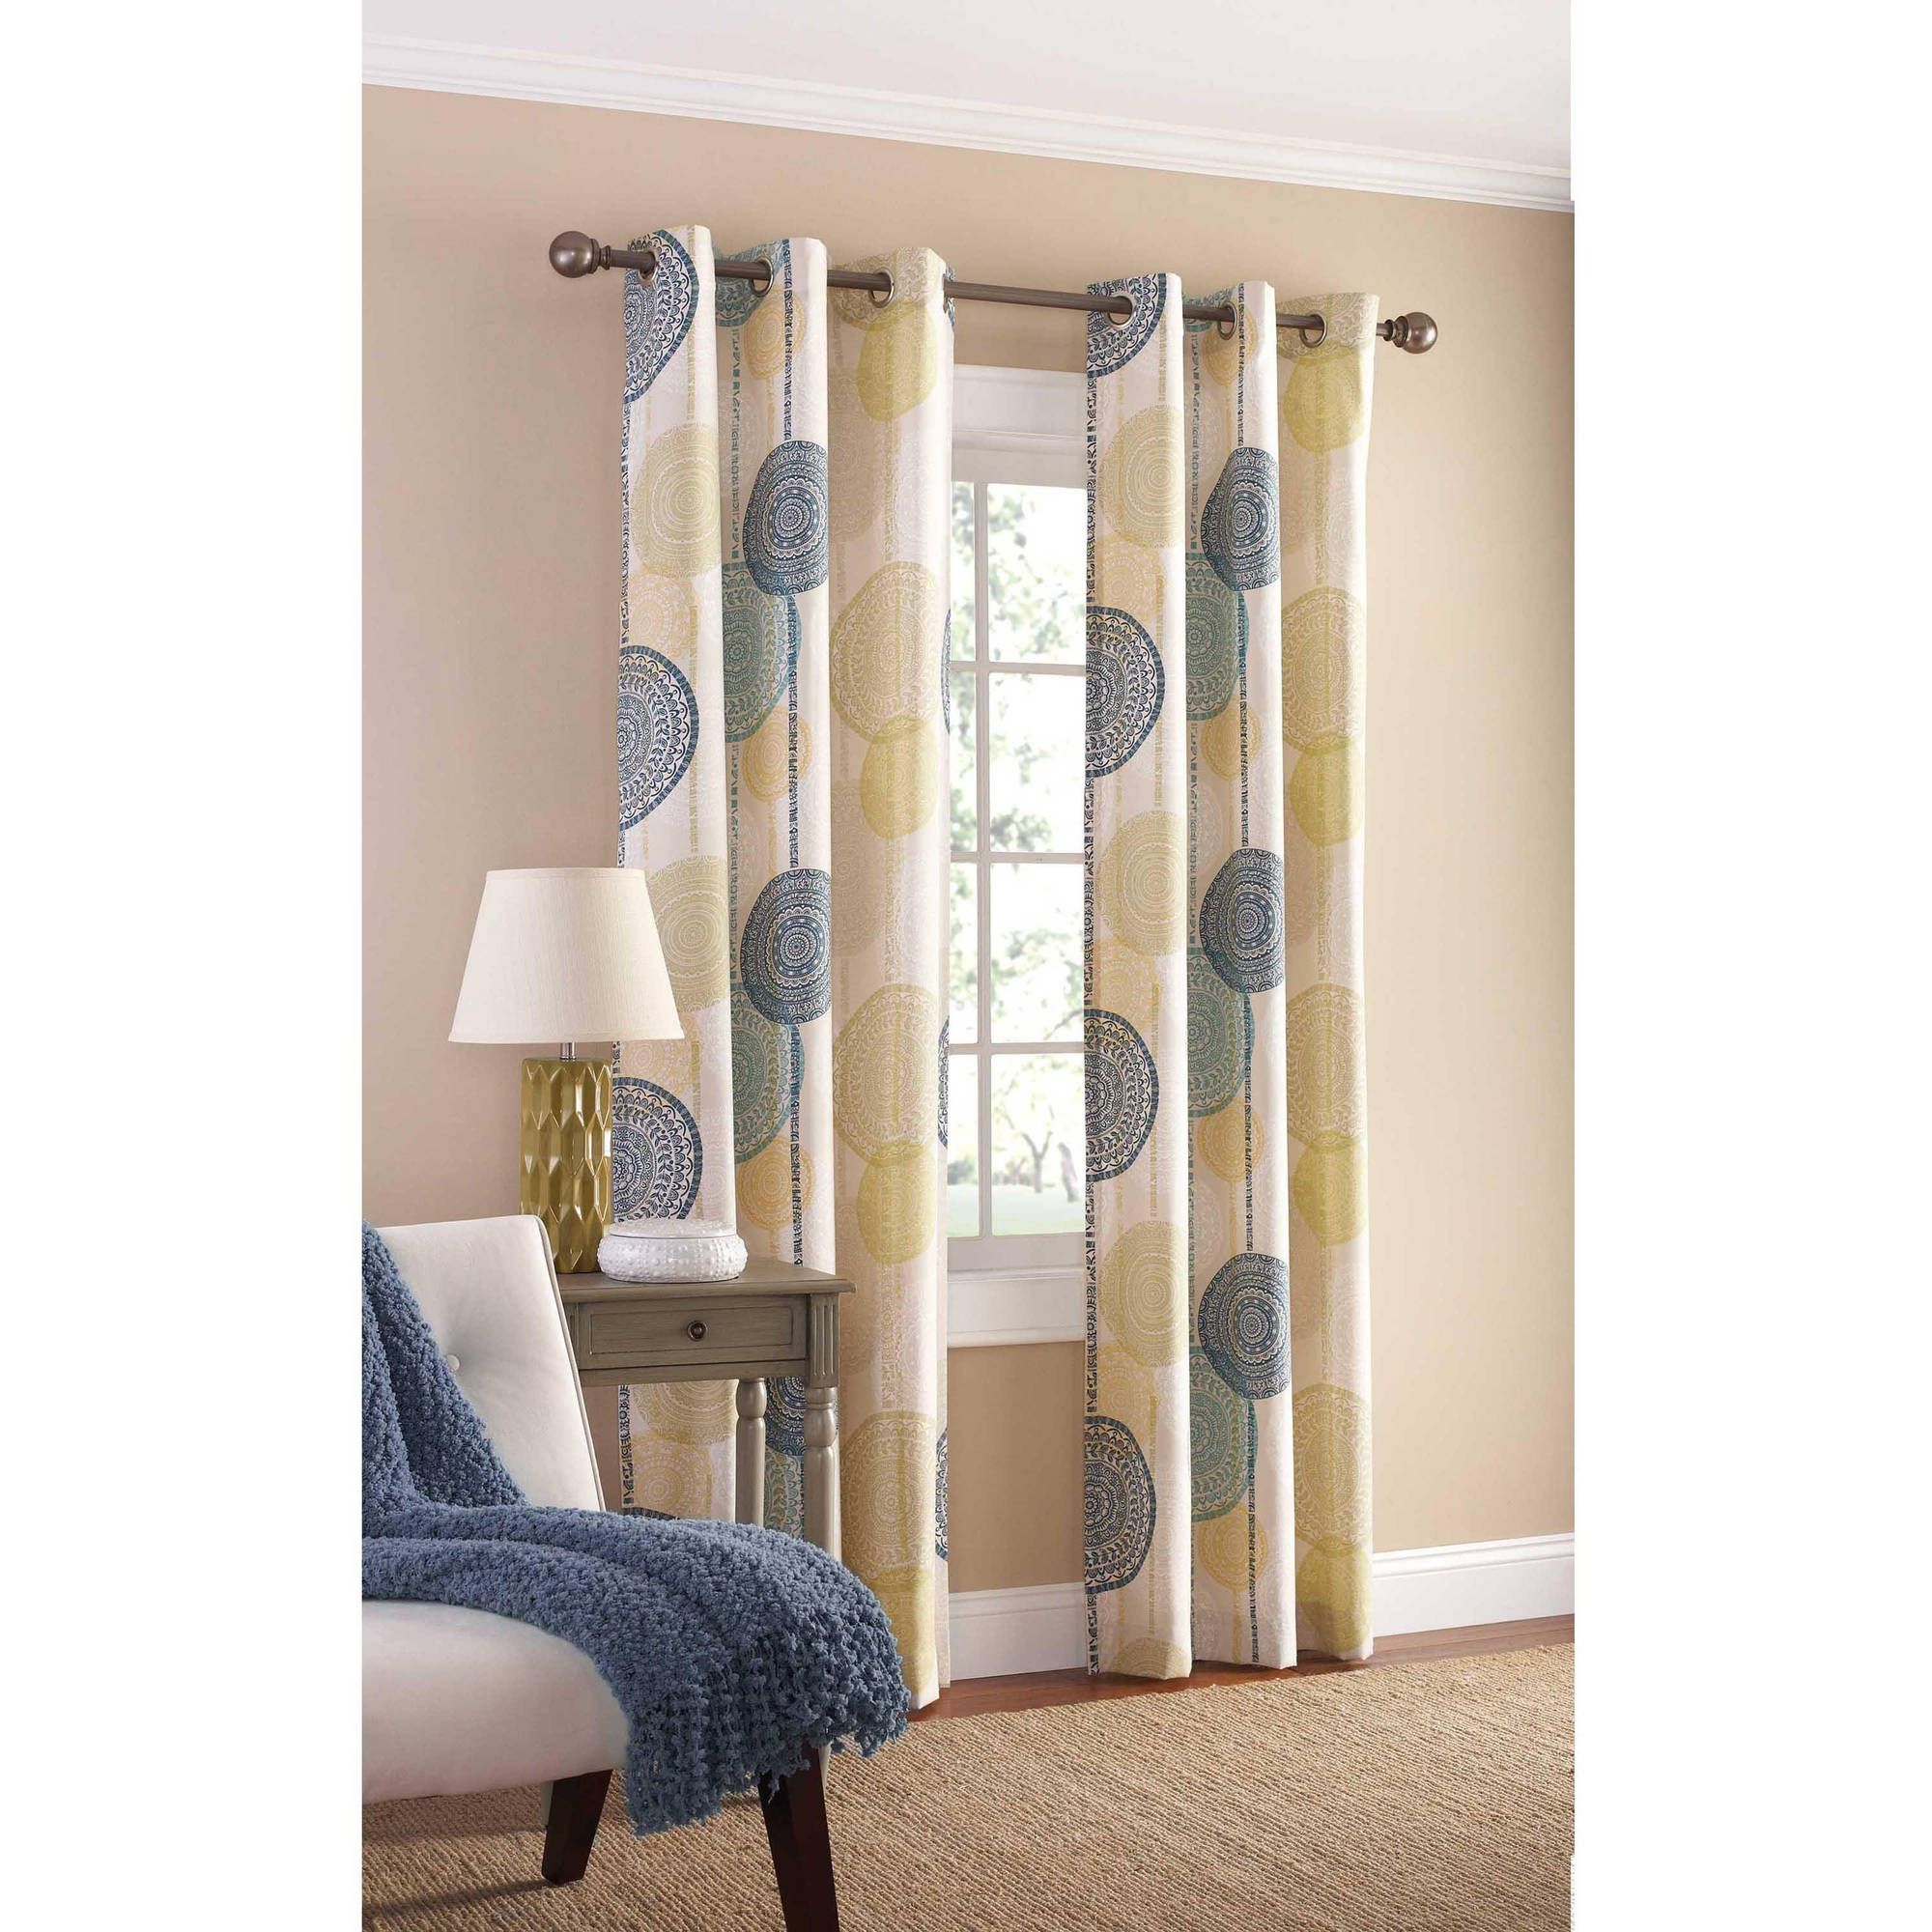 Curtain Charming Home Interior Accessories Ideas With Cute Within Sheer Grommet Curtain Panels (View 23 of 25)